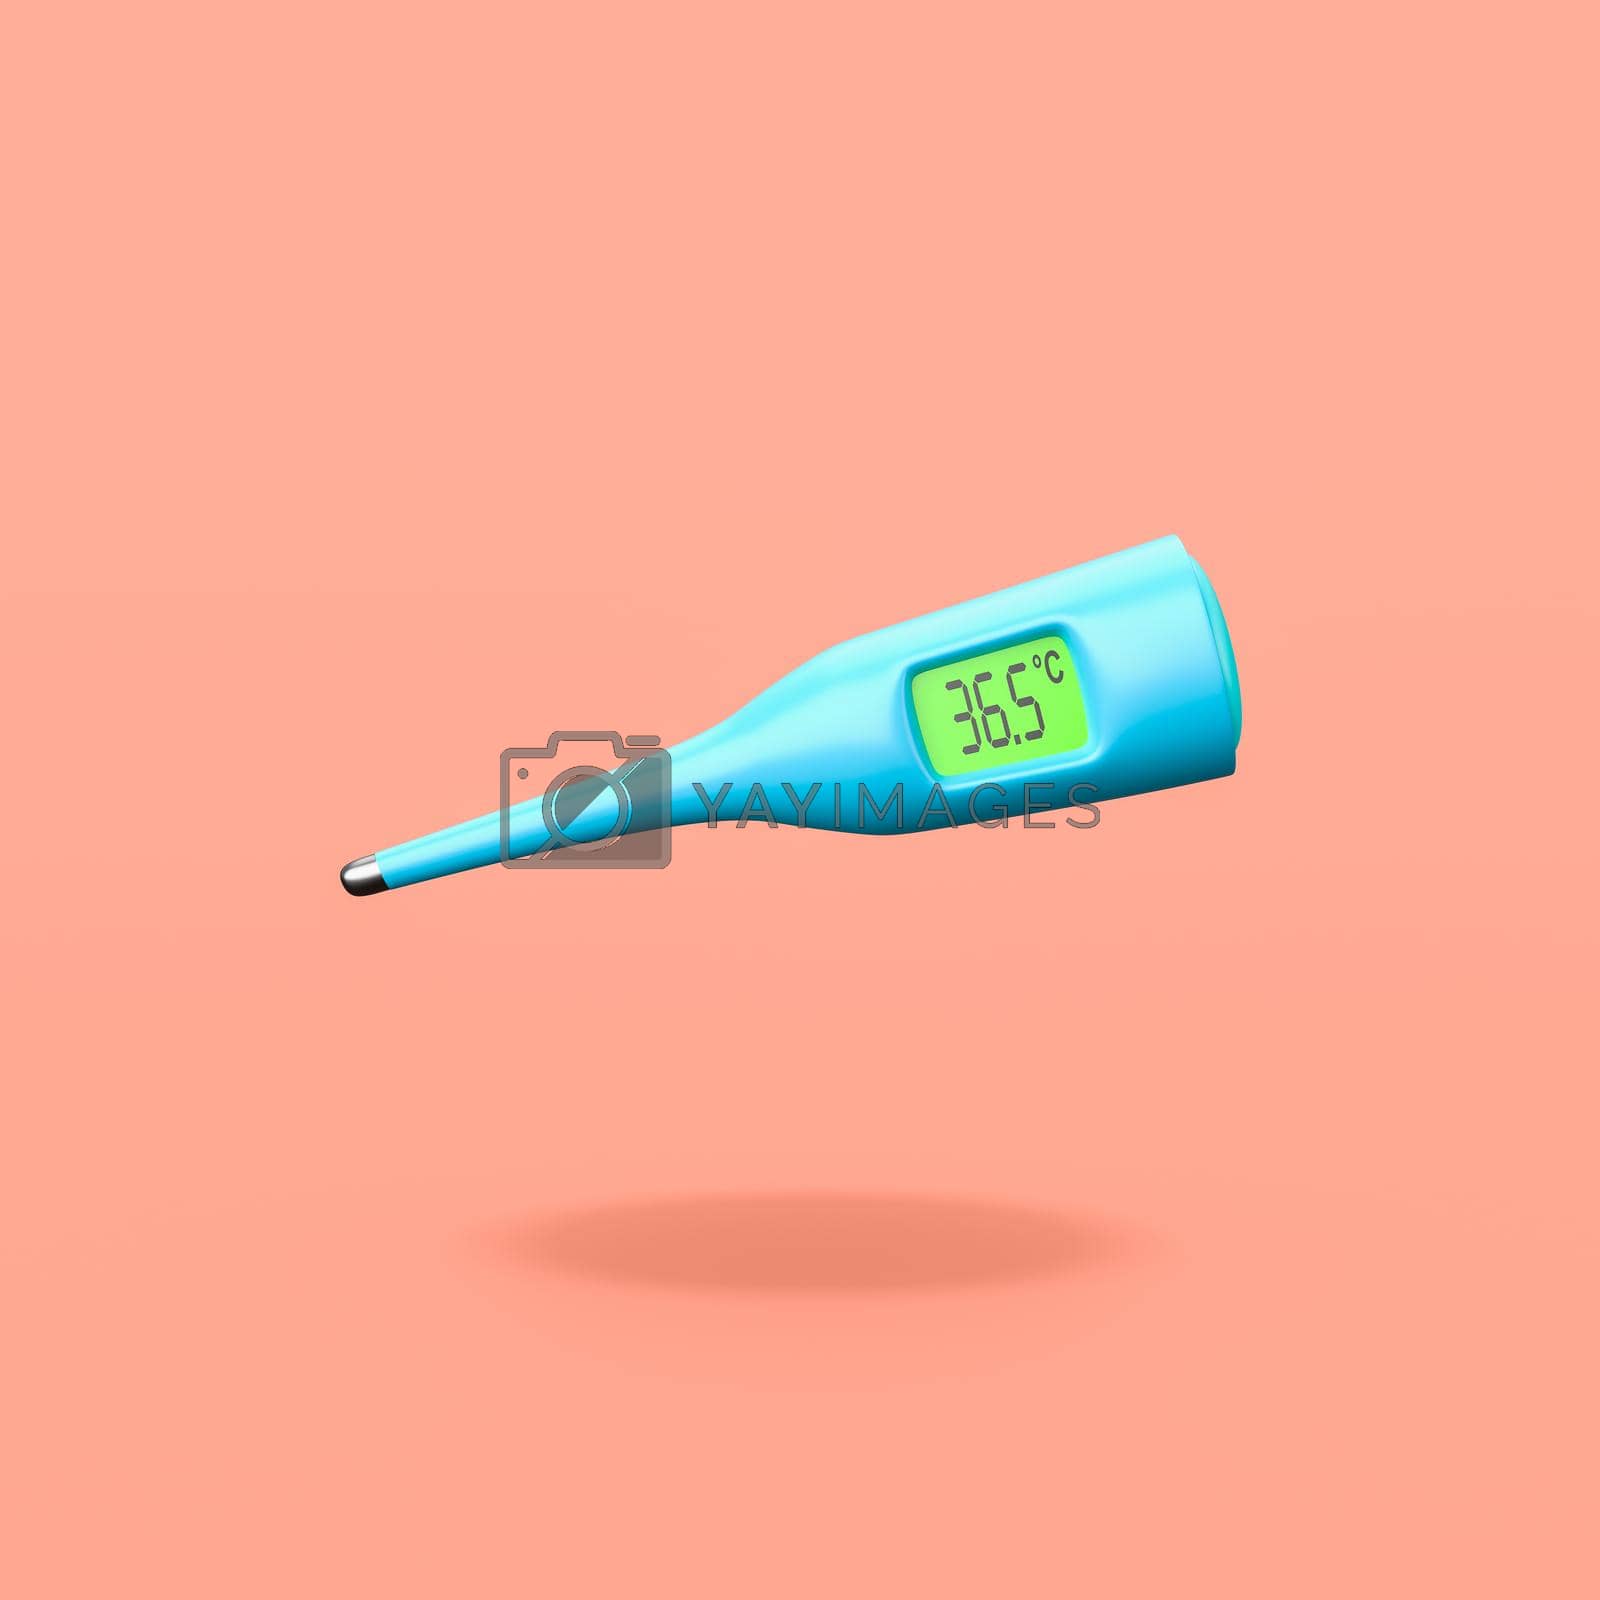 Royalty free image of Clinical Digital Thermometer on Orange Background by make